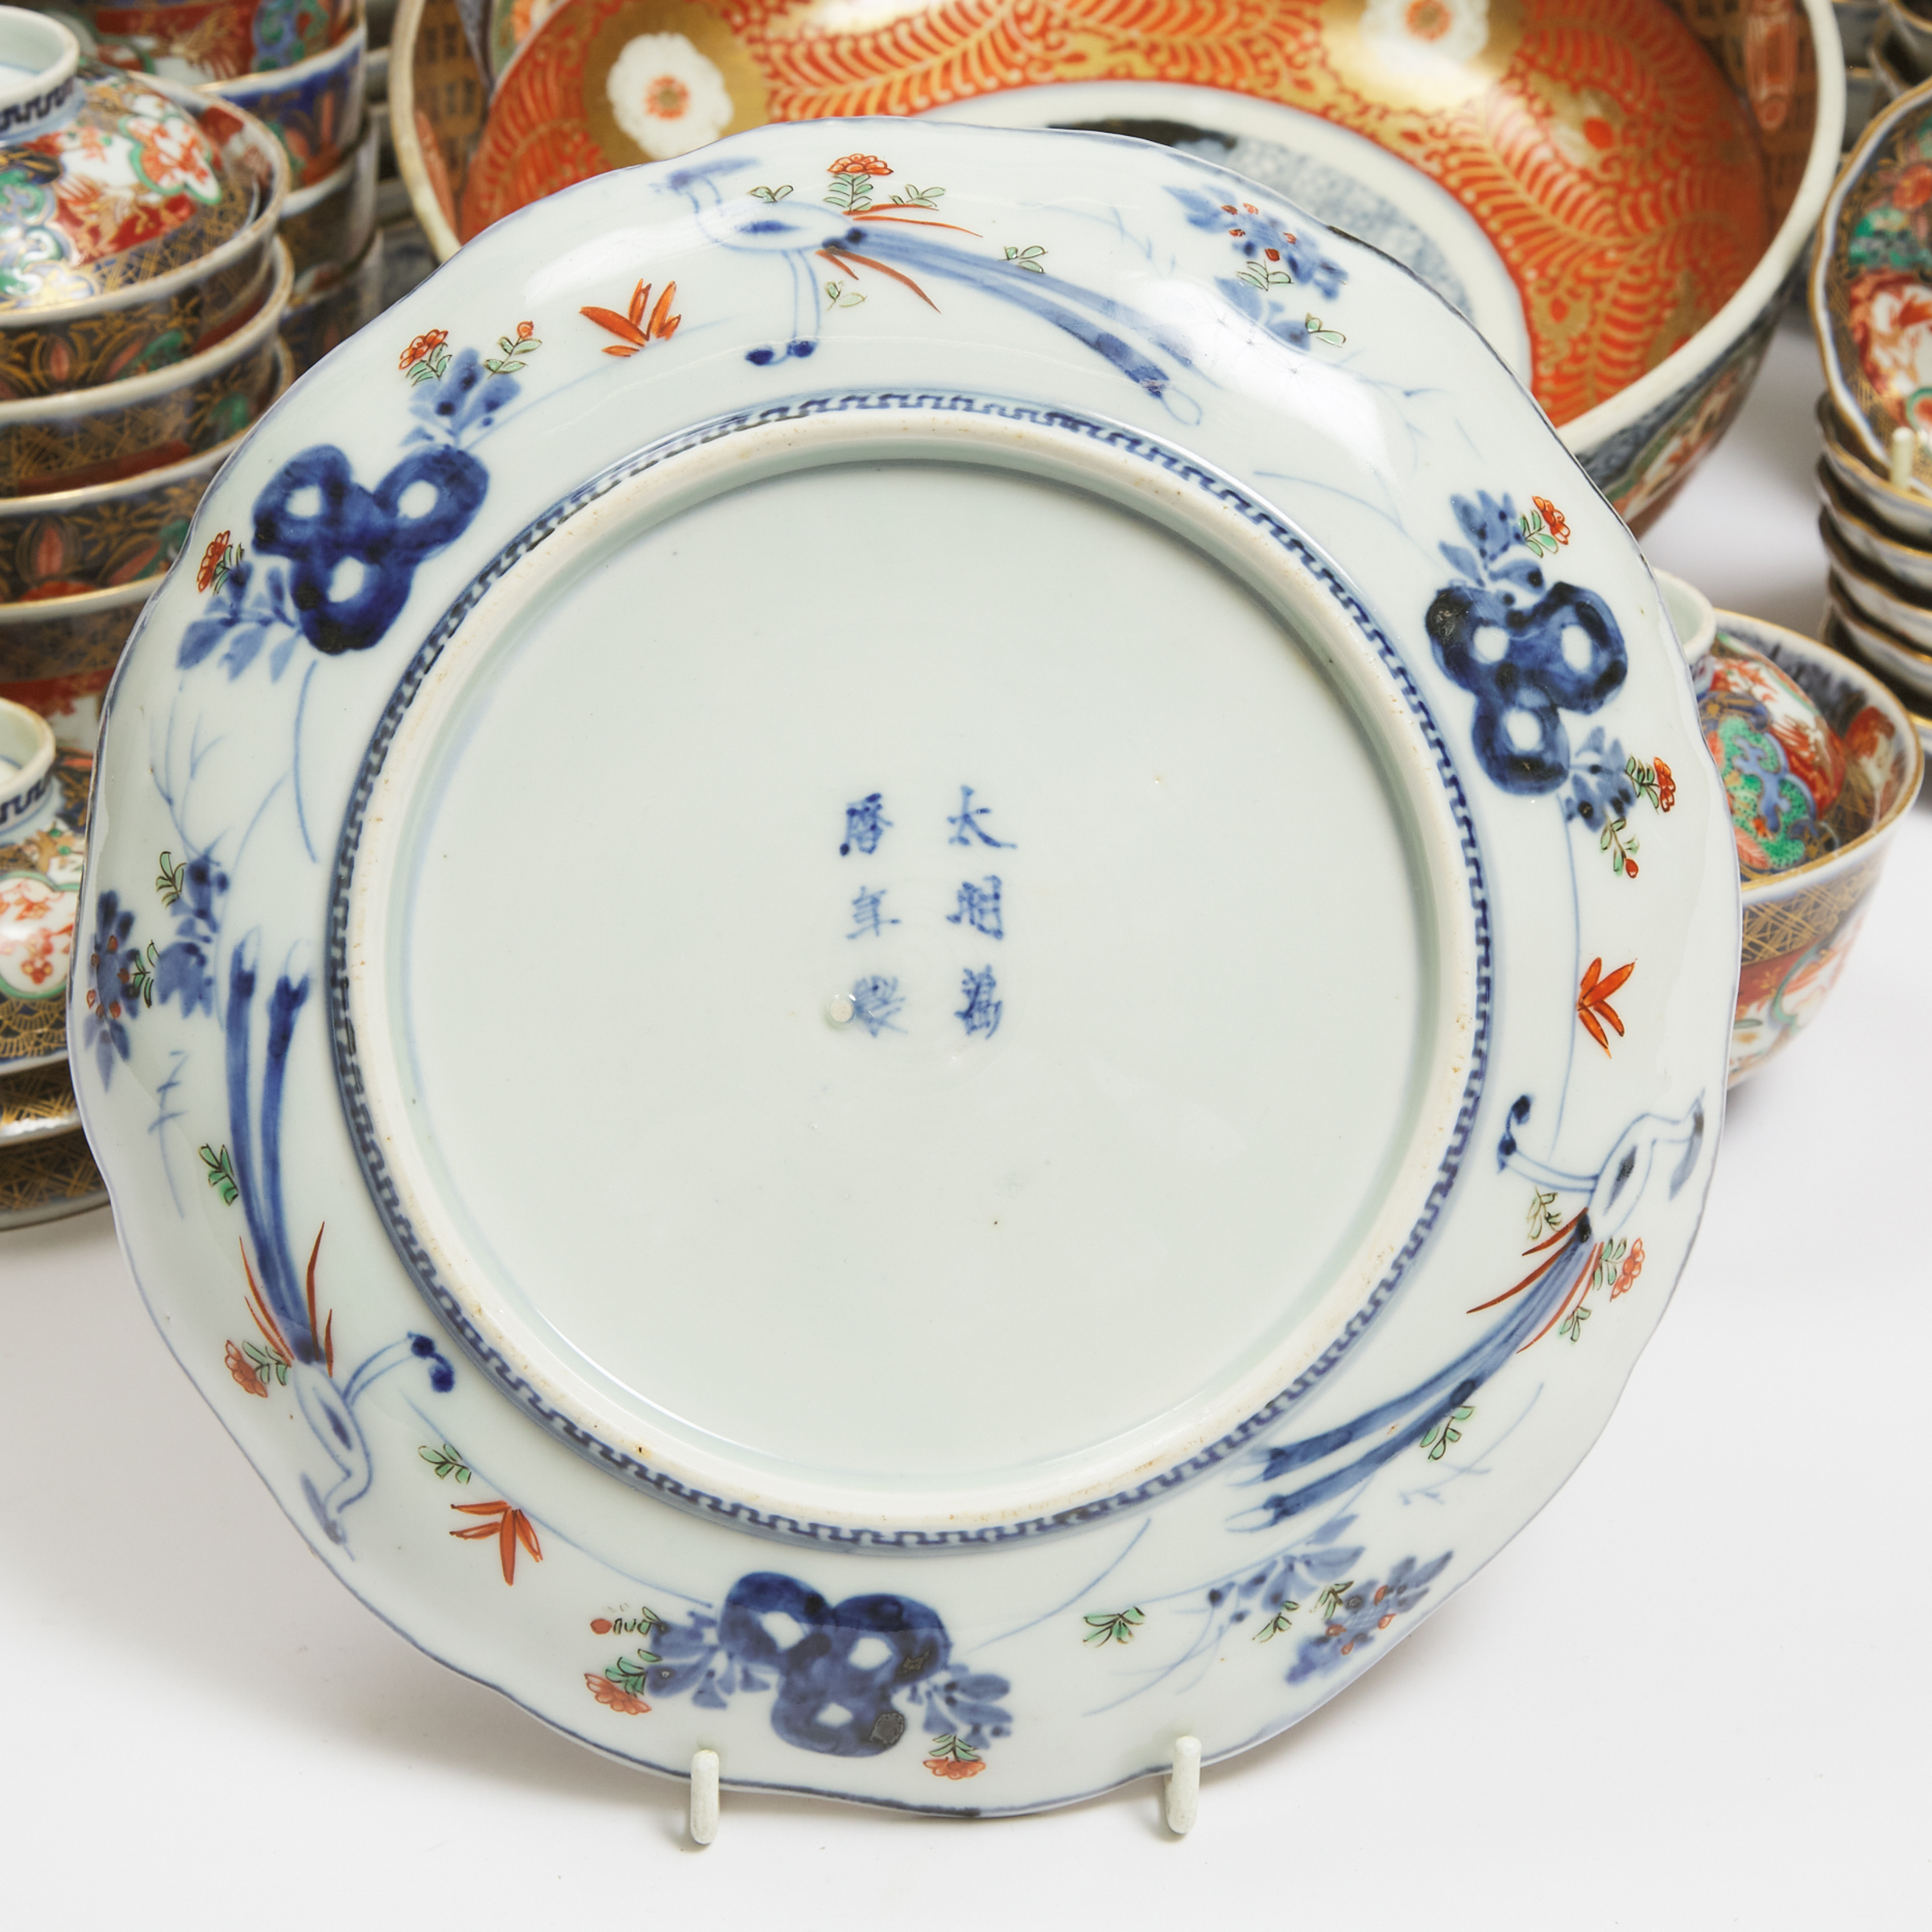 A Large Collection of Seventy-Three Japanese Imari Porcelain Wares, Meiji Period (1868-1912)